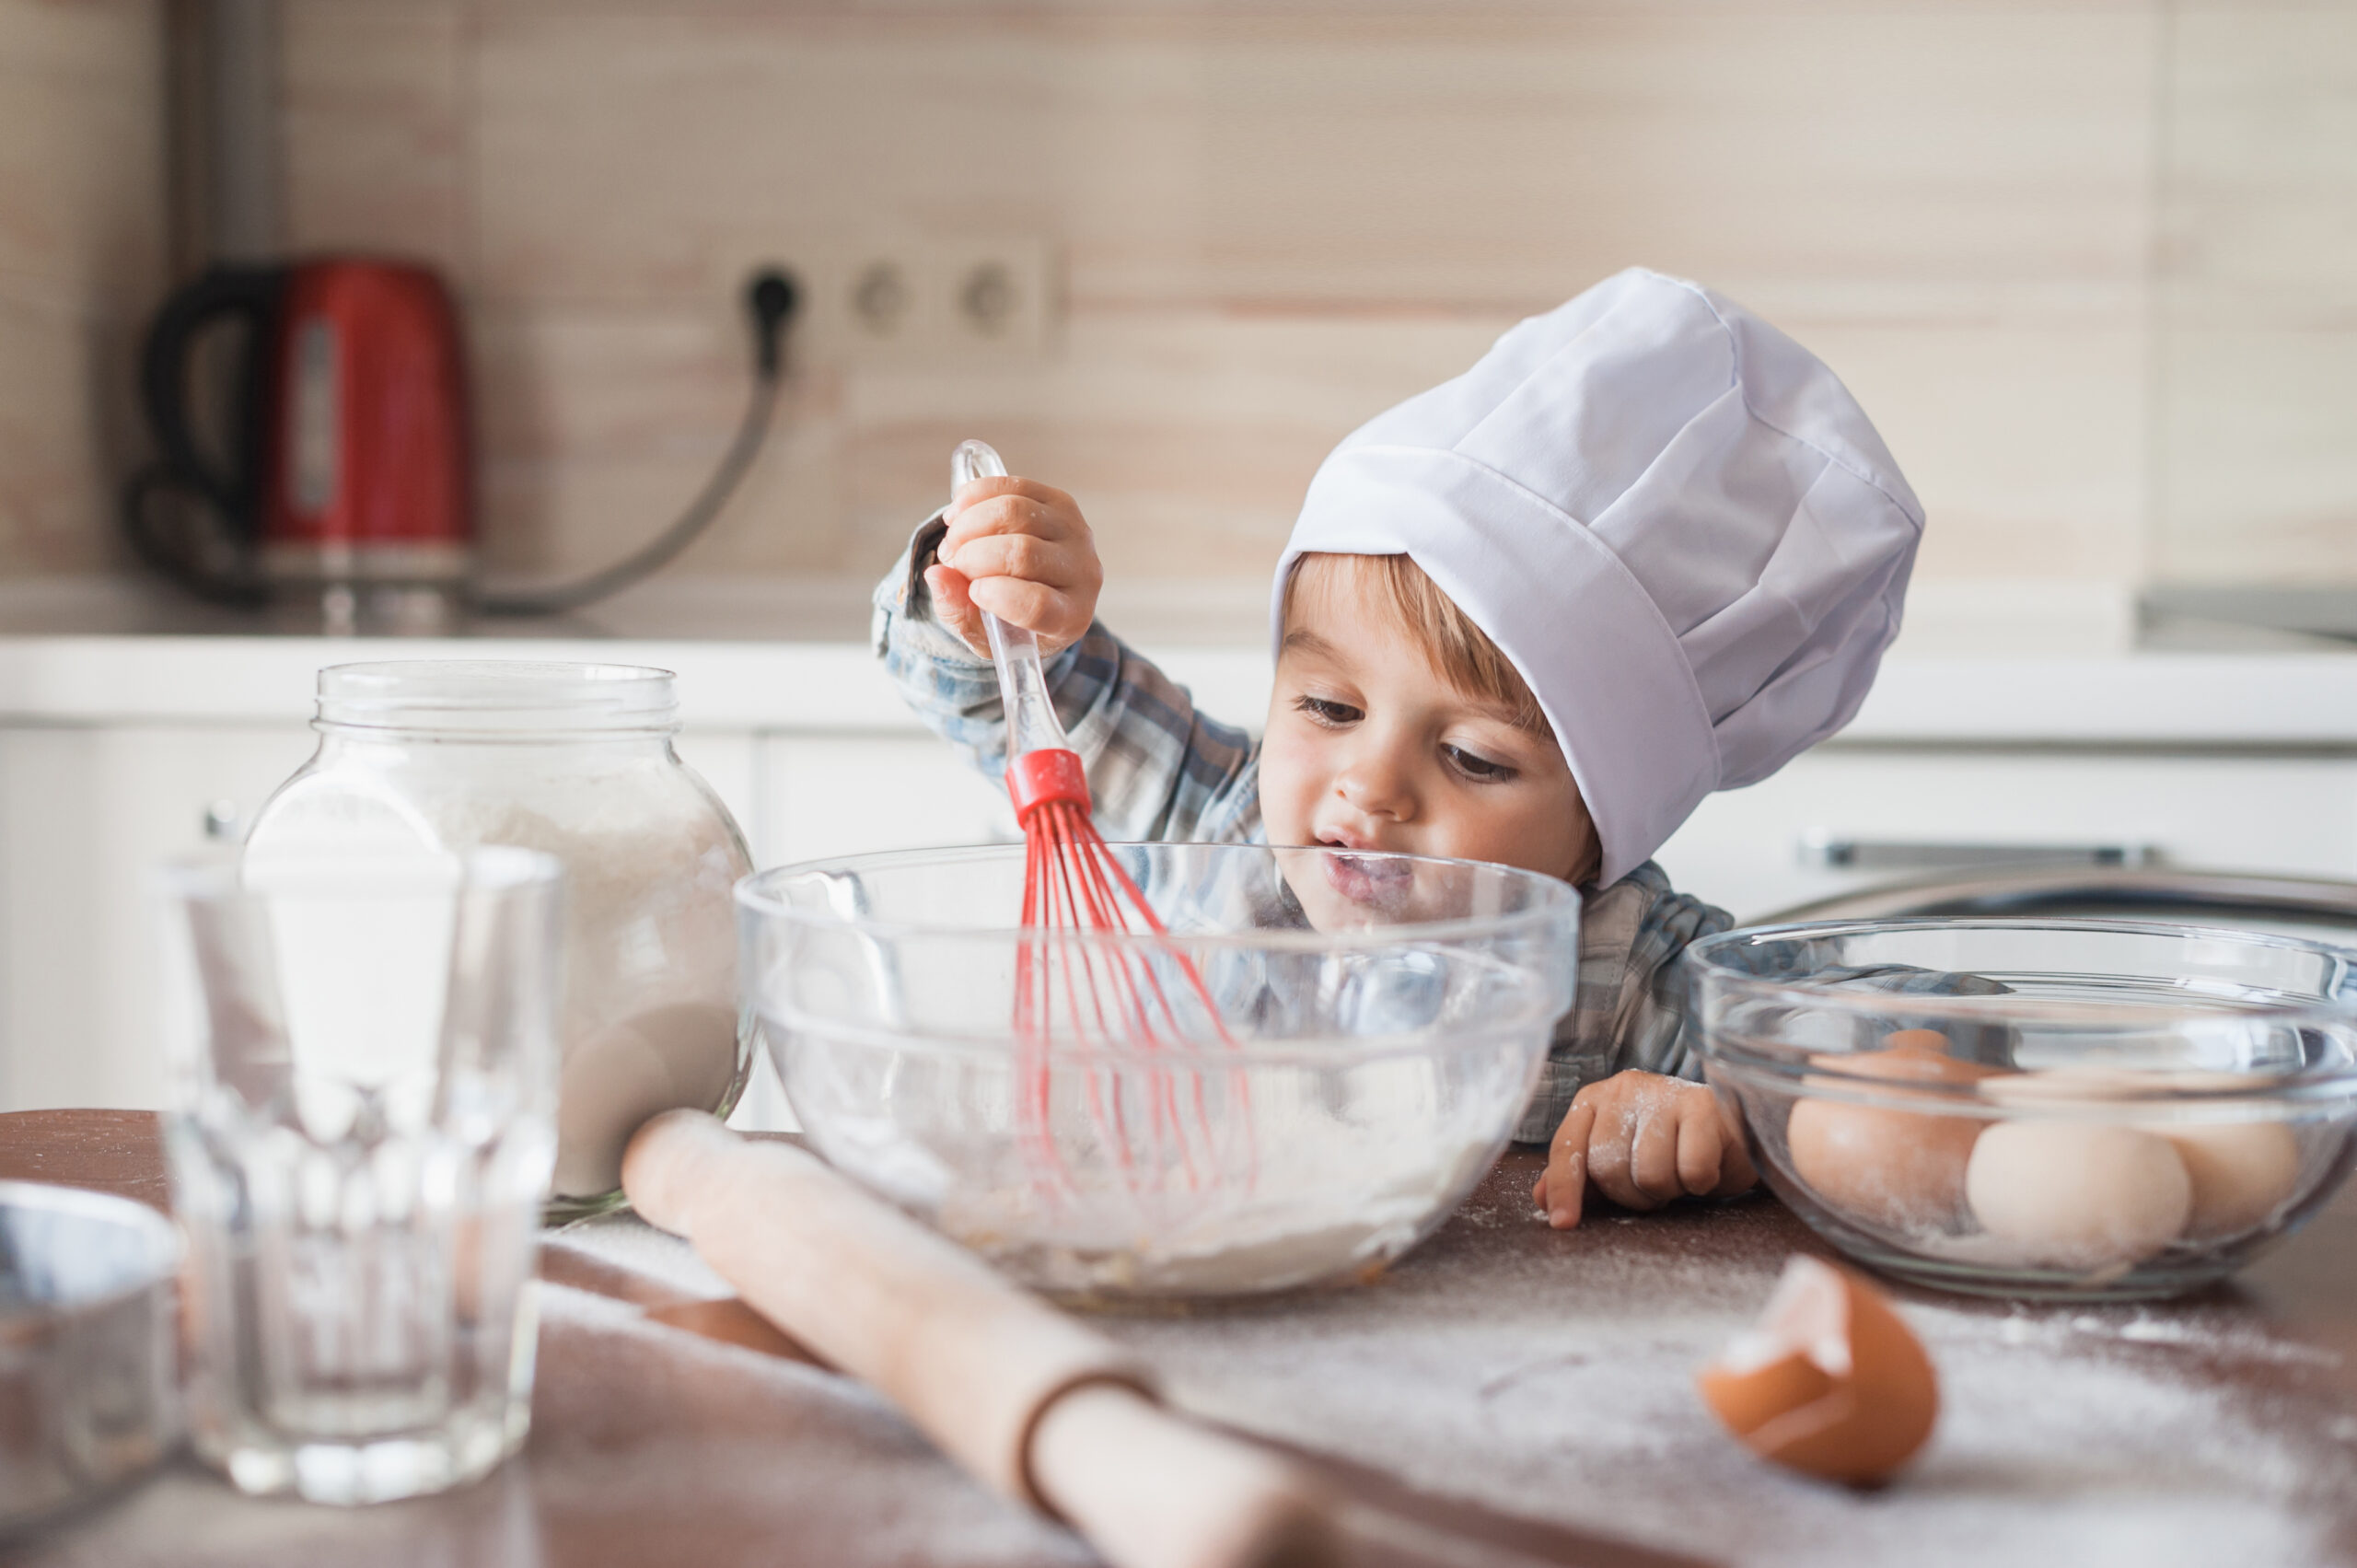 Do Kids Really Need Special "Kids" Kitchen Tools? | Didn't I Just Feed You podcast